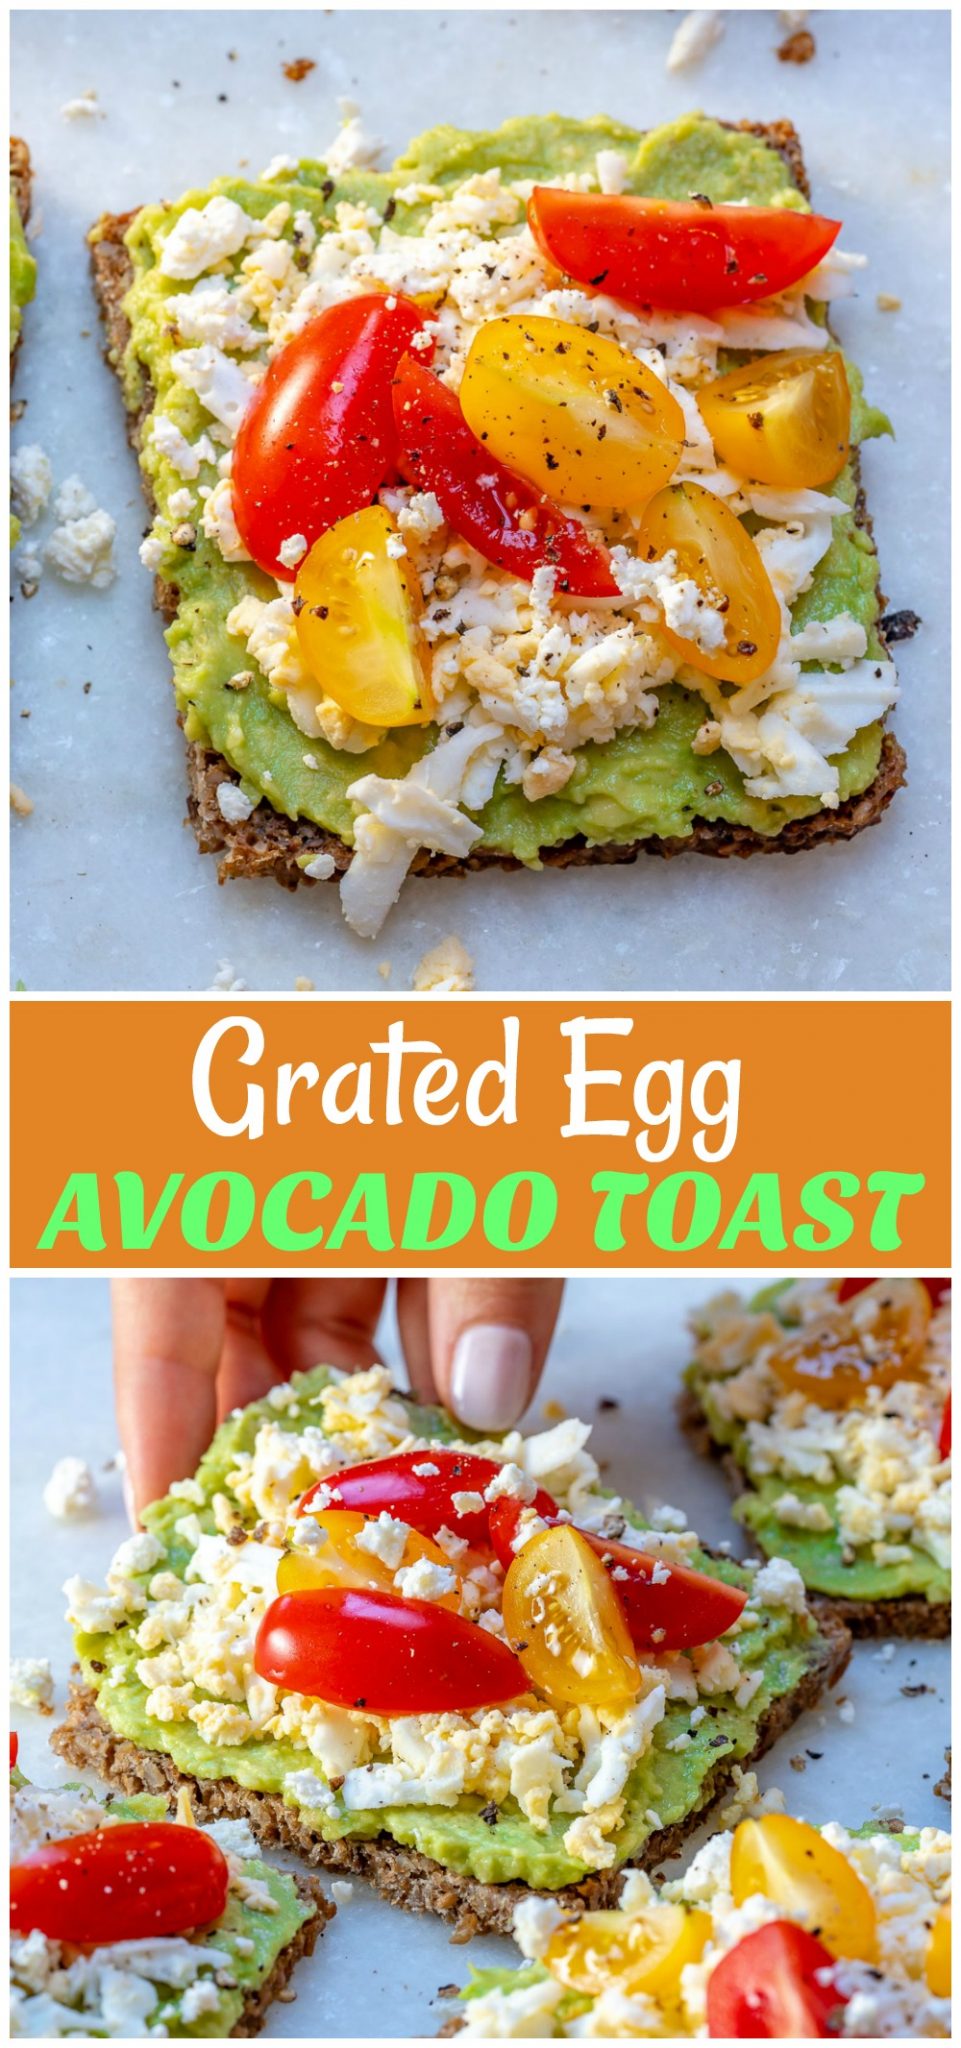 Grated Egg Avocado Toast Clean Protein Snack